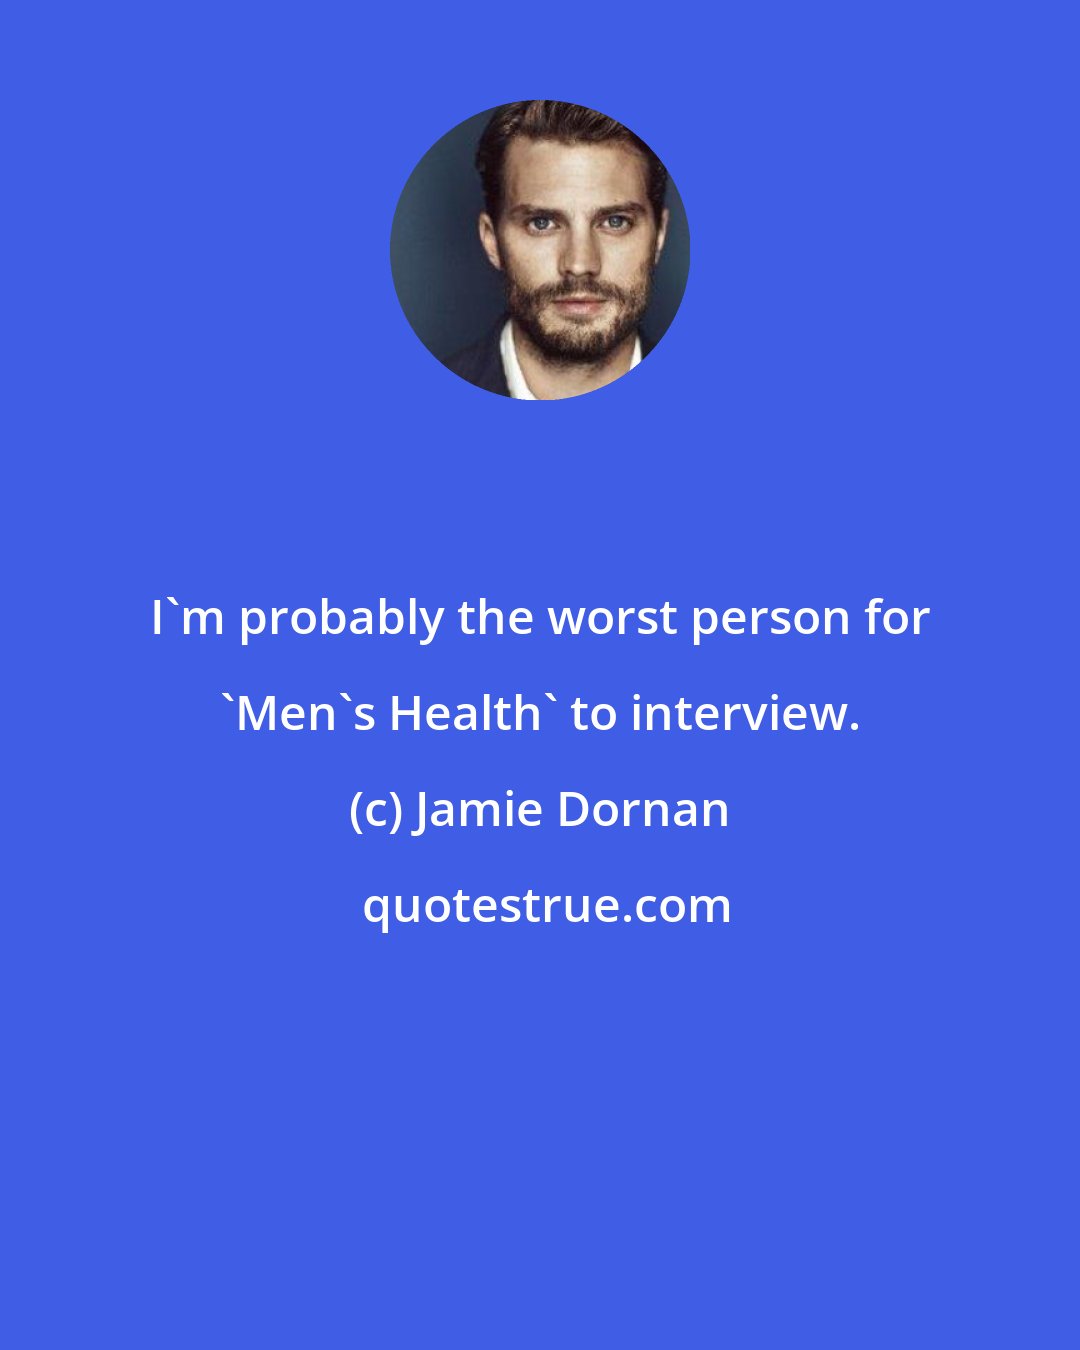 Jamie Dornan: I'm probably the worst person for 'Men's Health' to interview.